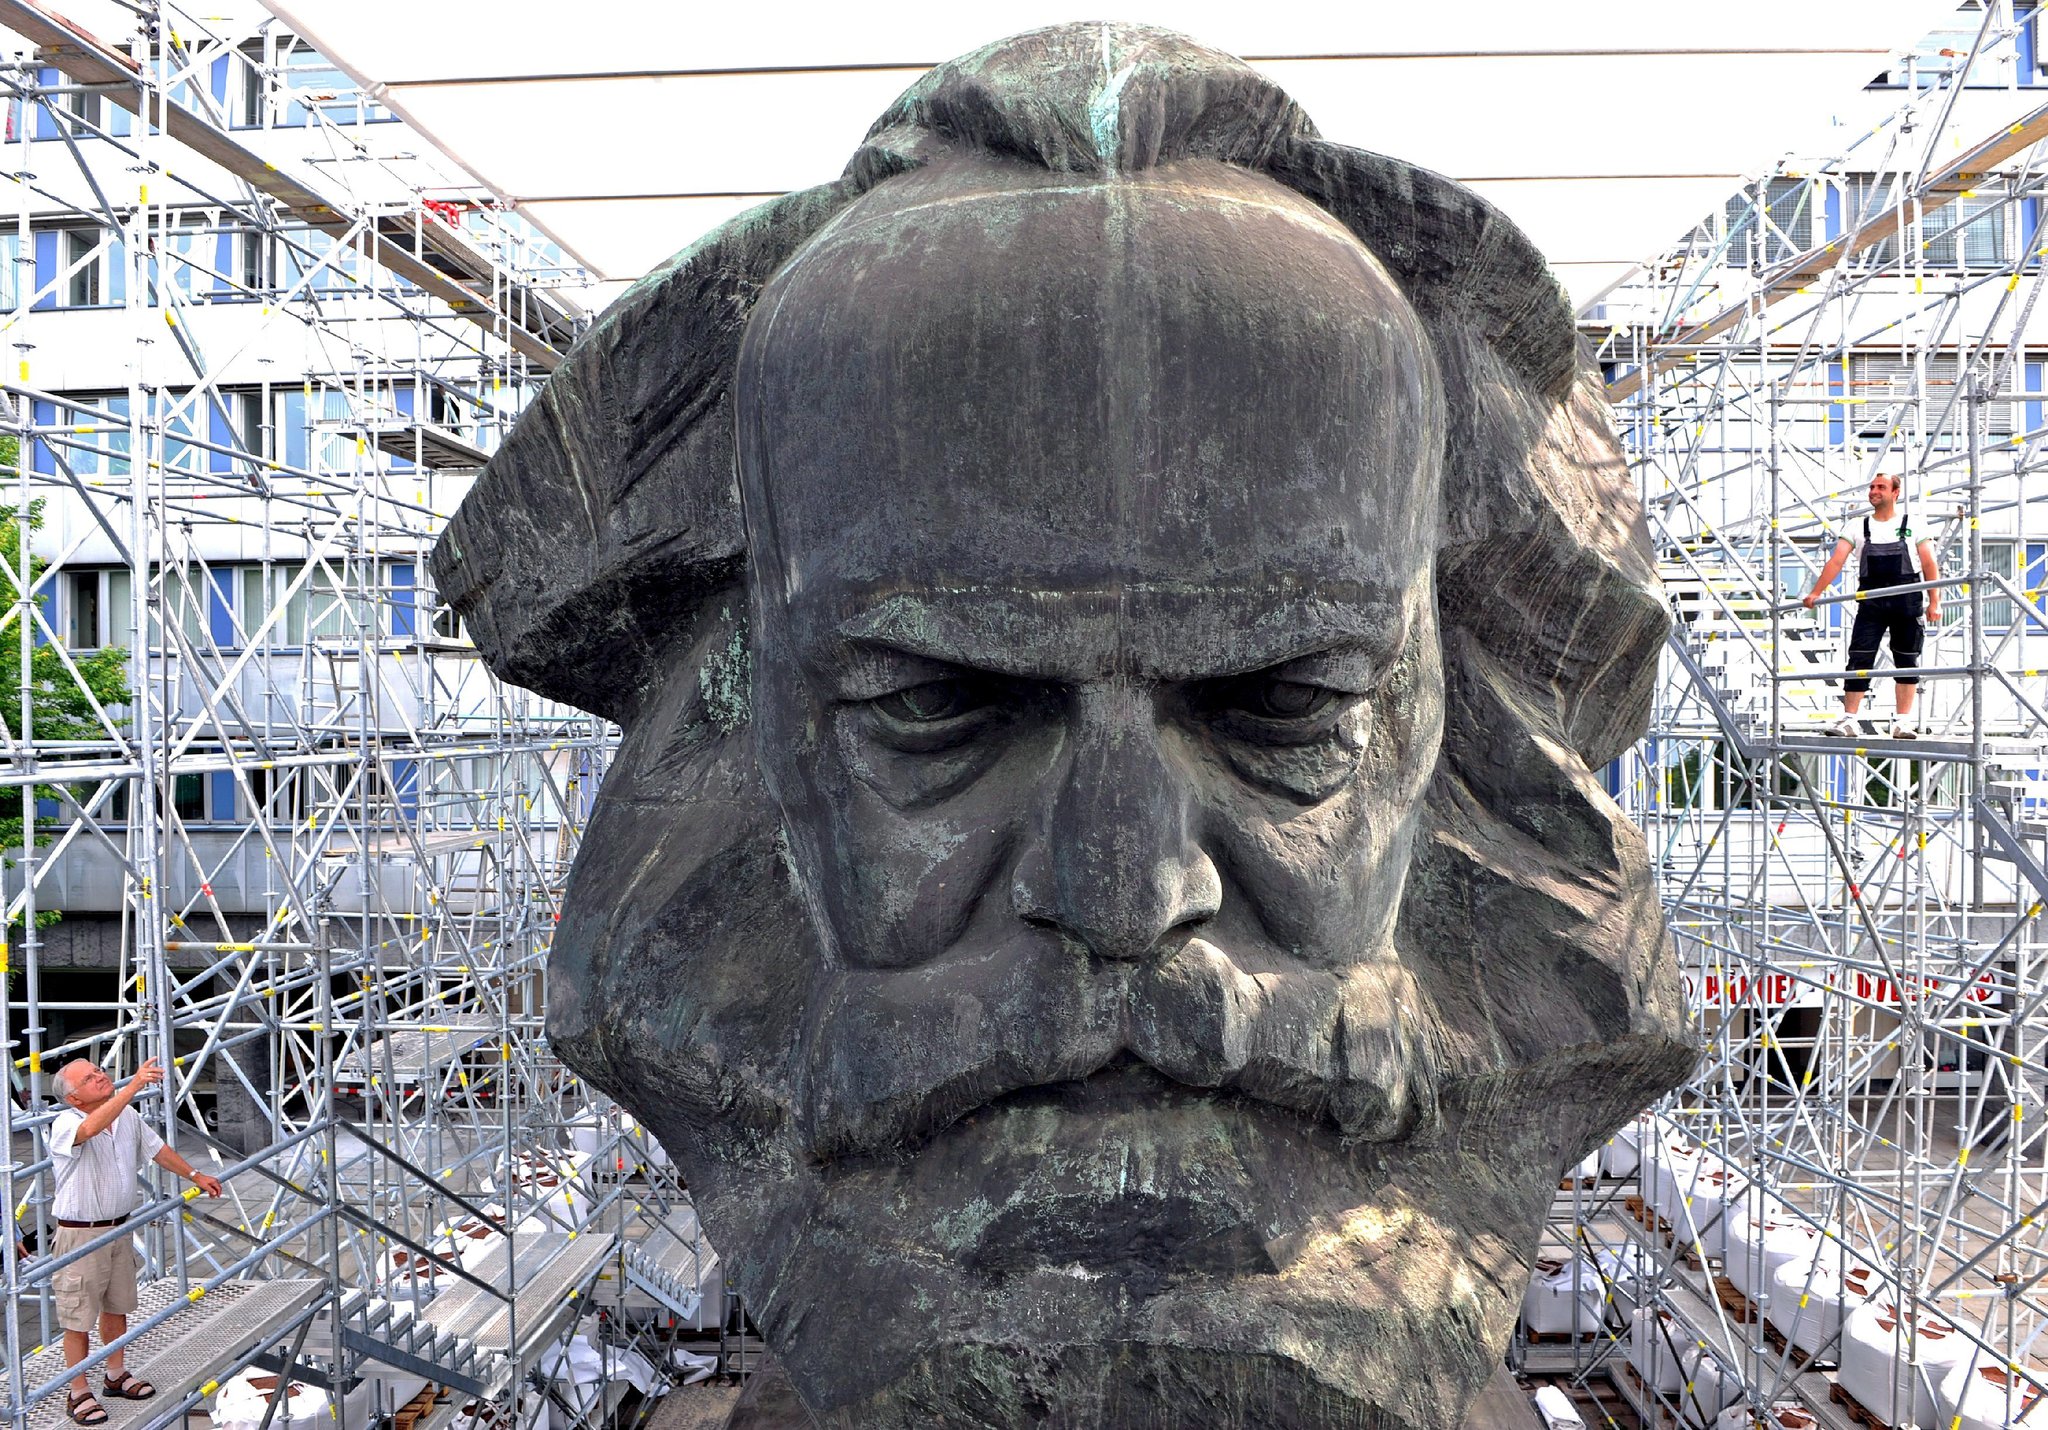 Reviewing the Relevance of Marxism